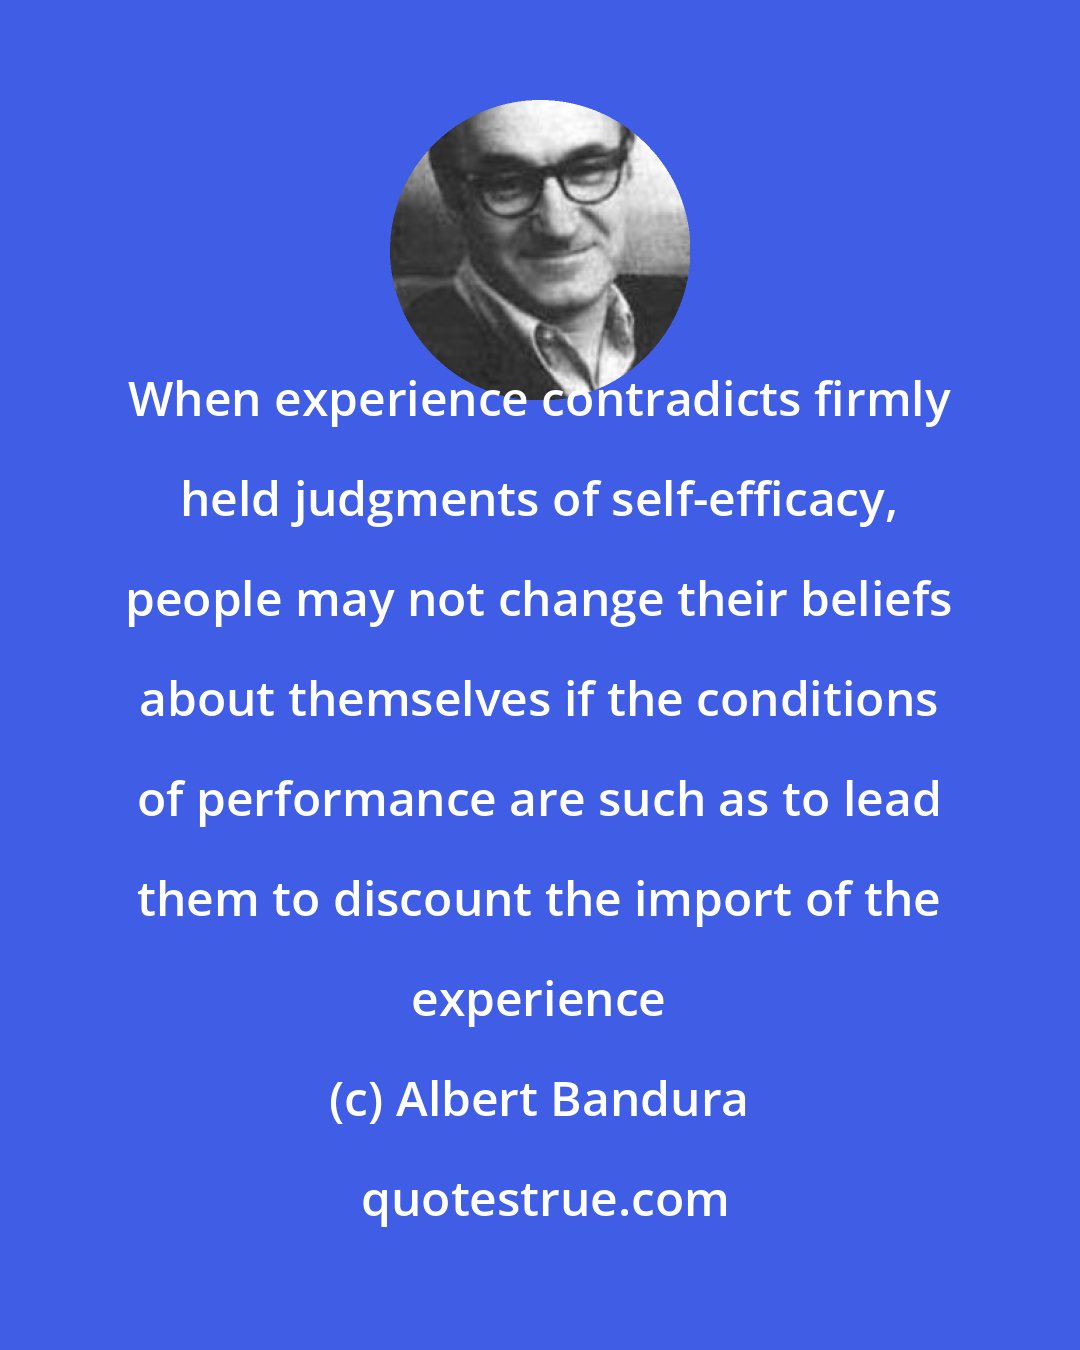 Albert Bandura: When experience contradicts firmly held judgments of self-efficacy, people may not change their beliefs about themselves if the conditions of performance are such as to lead them to discount the import of the experience